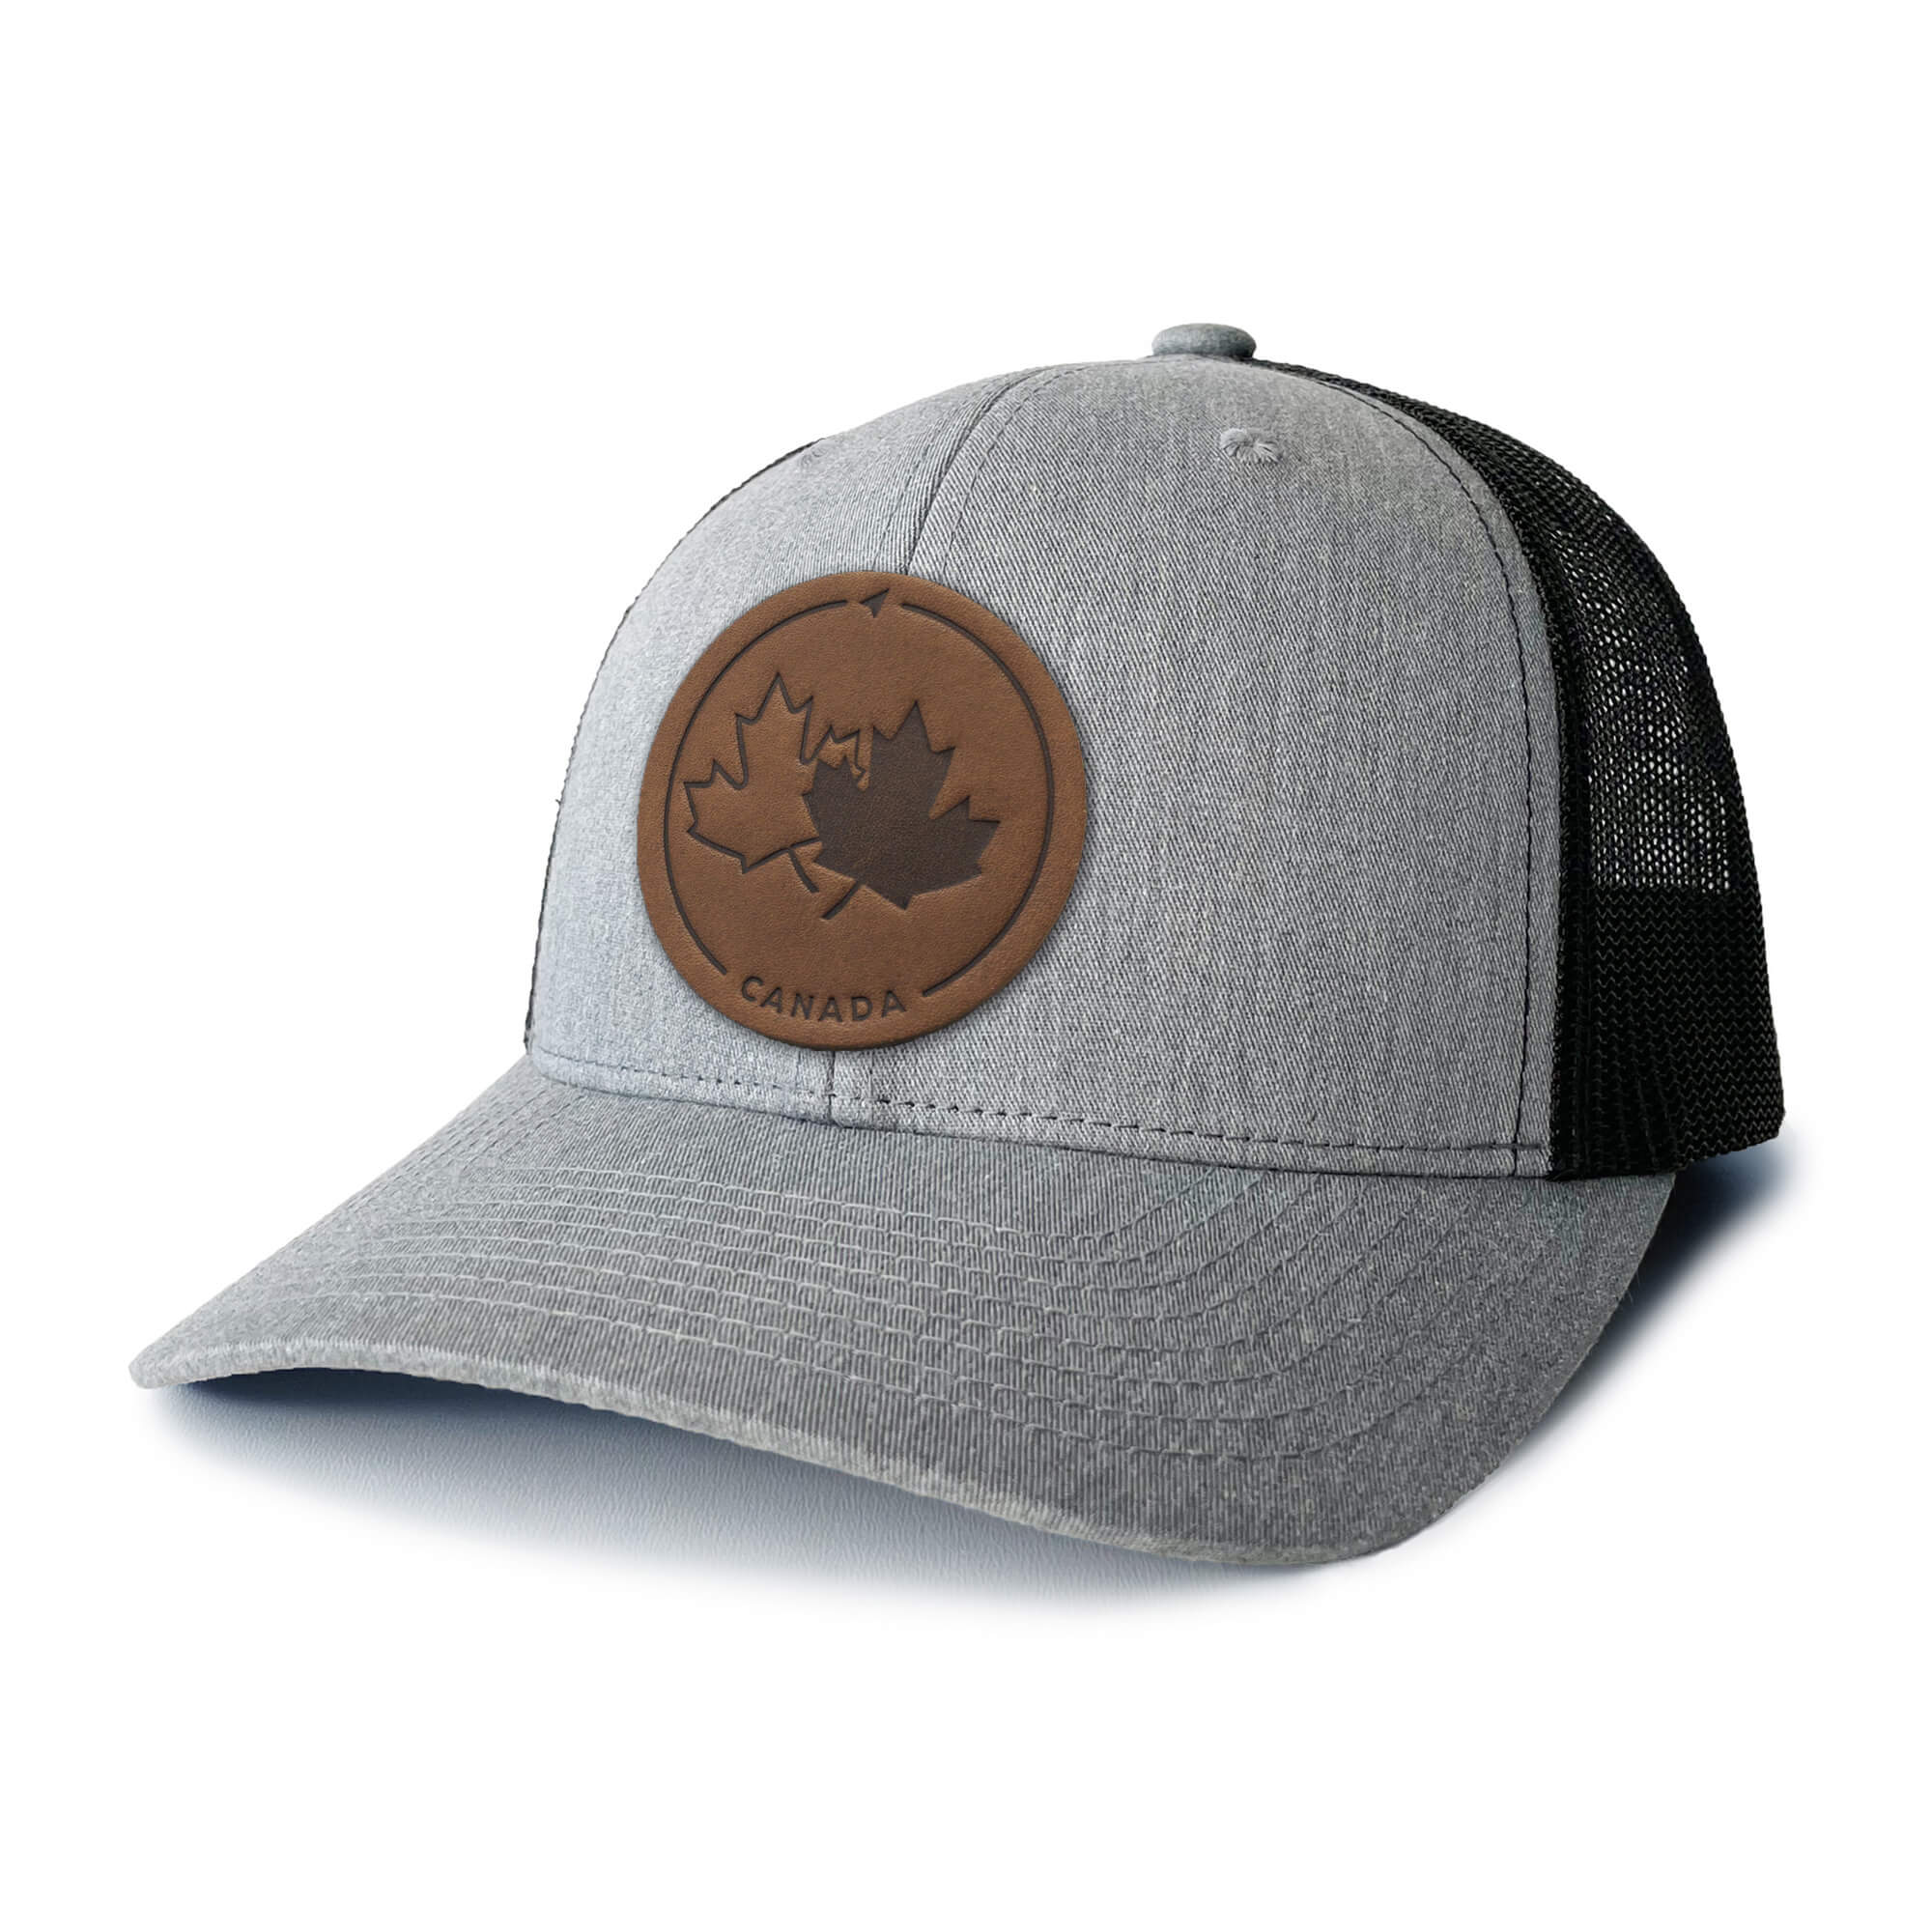 Heather Grey and white trucker hat with full-grain leather patch of Canada Strong and Free | BLACK-002-010, CHARC-002-010, NAVY-002-010, HGREY-002-010, MOSS-002-010, BROWN-002-010, RED-002-010